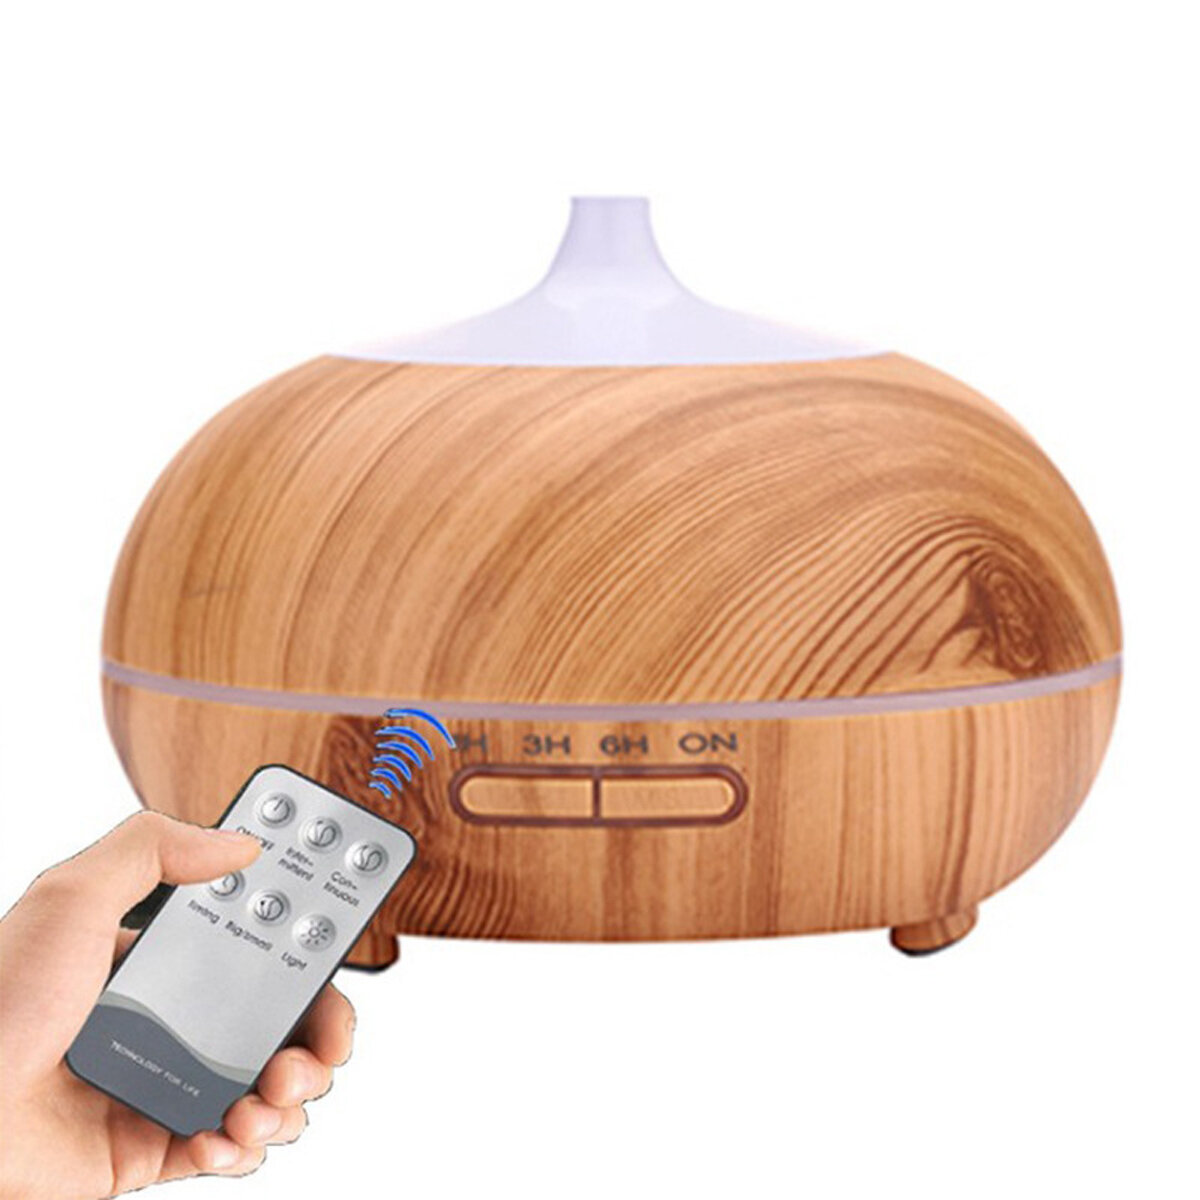 

300ml Electric Ultrasonic Air Mist Humidifier Purifier Aroma Diffuser 5 Colors LED Timing Function for Home Car Office